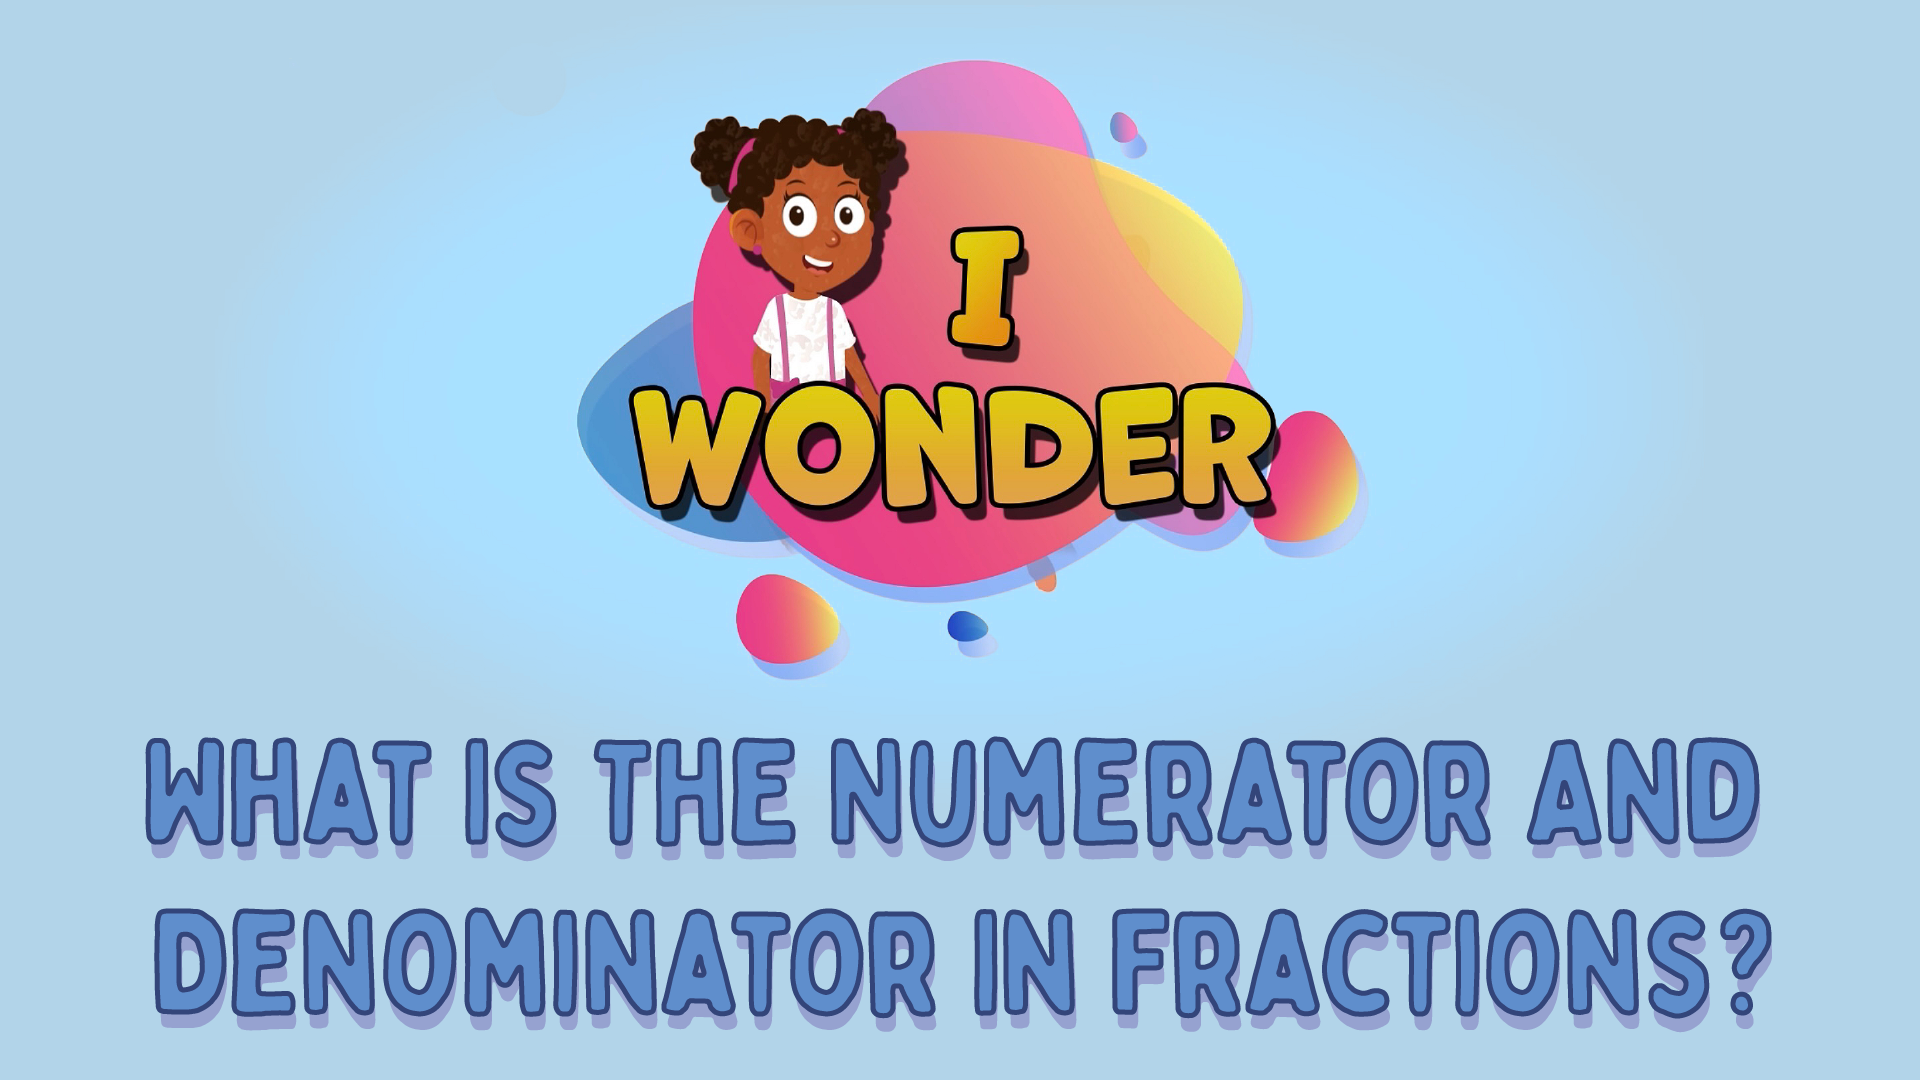 What Is The Numerator And Denominator In Fractions?